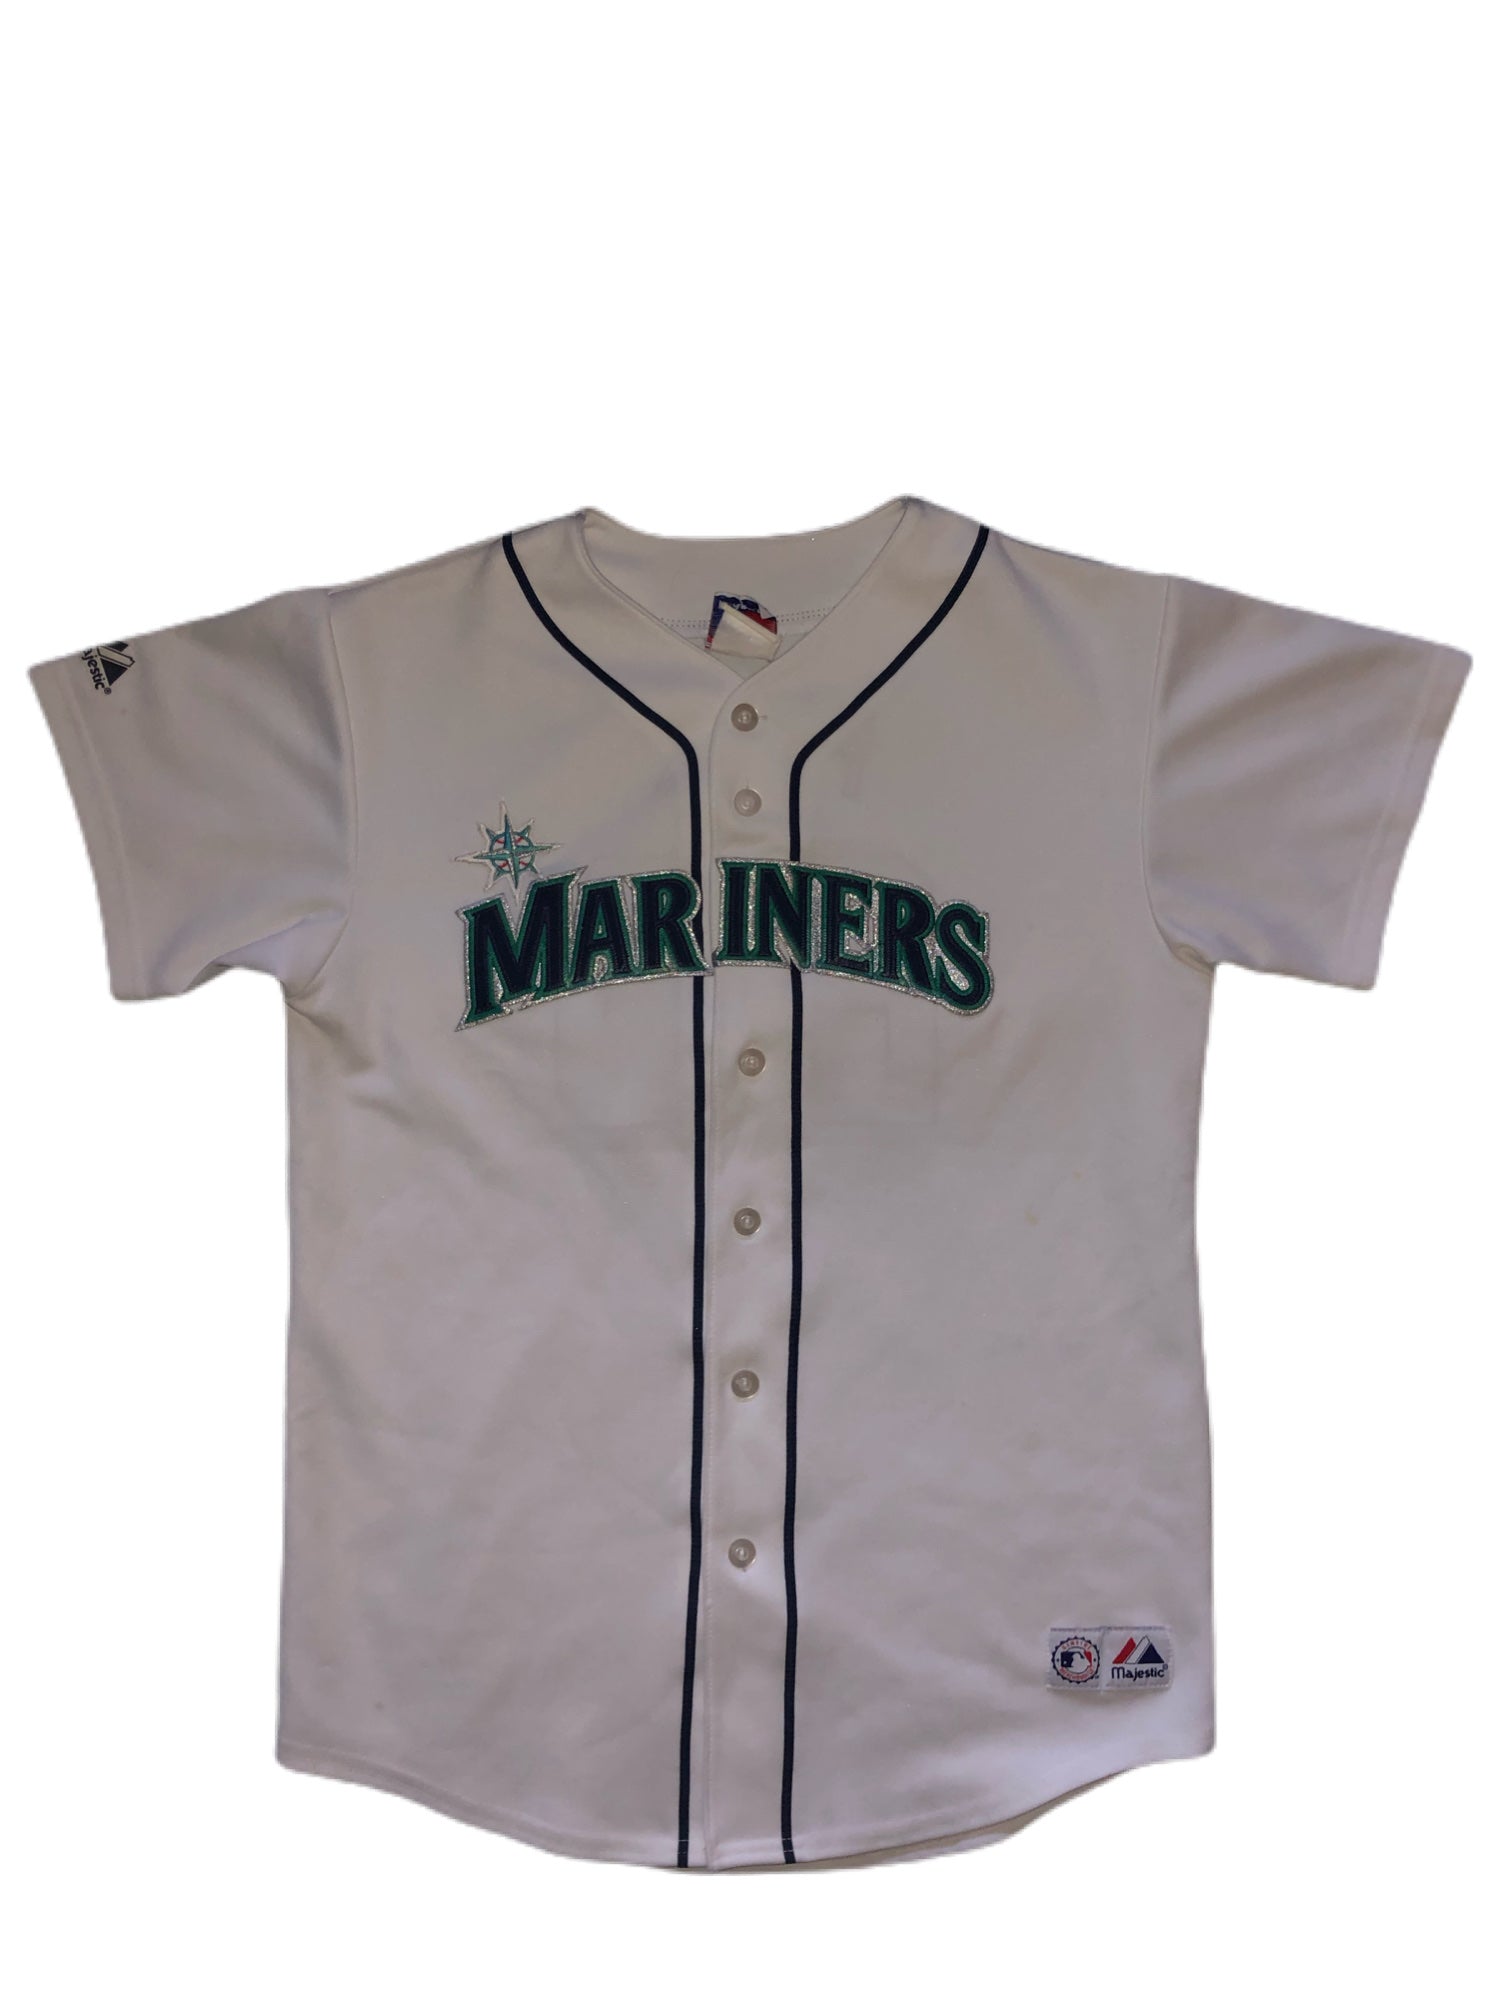 mariners jersey today